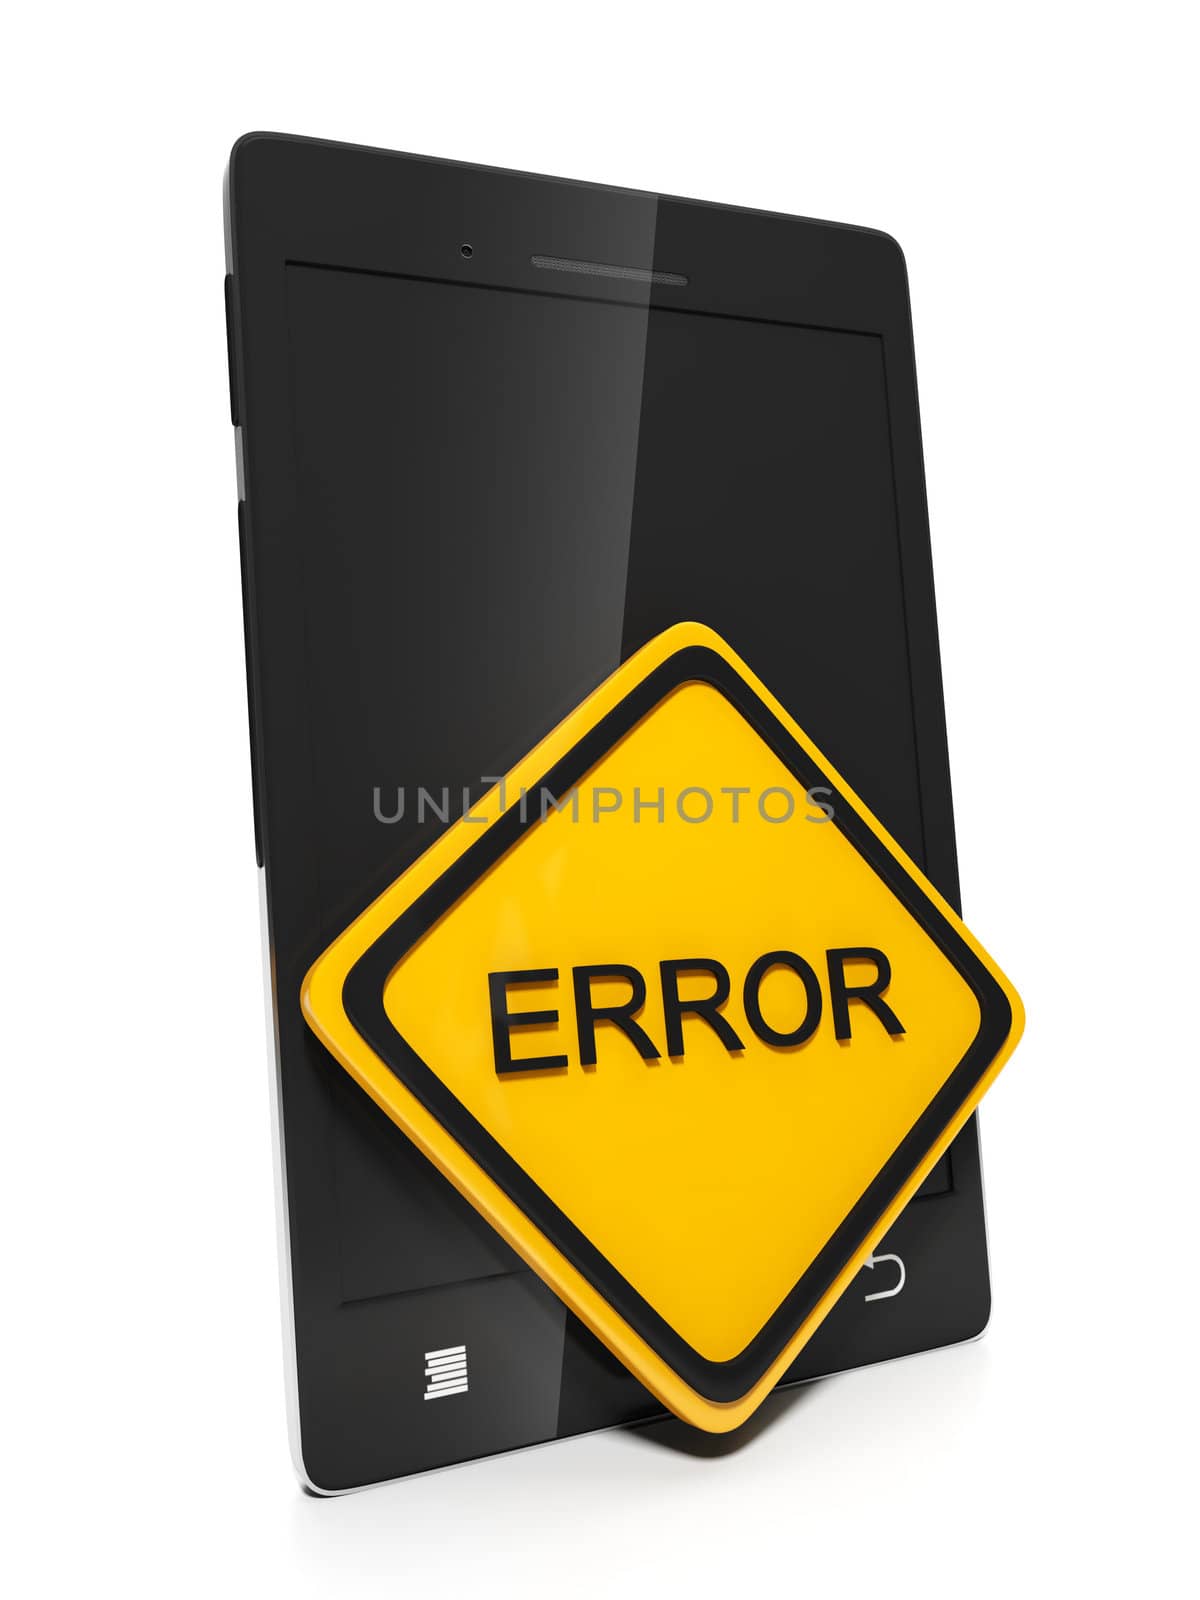 Mobile phone with a sign error. Mobile phones by kolobsek